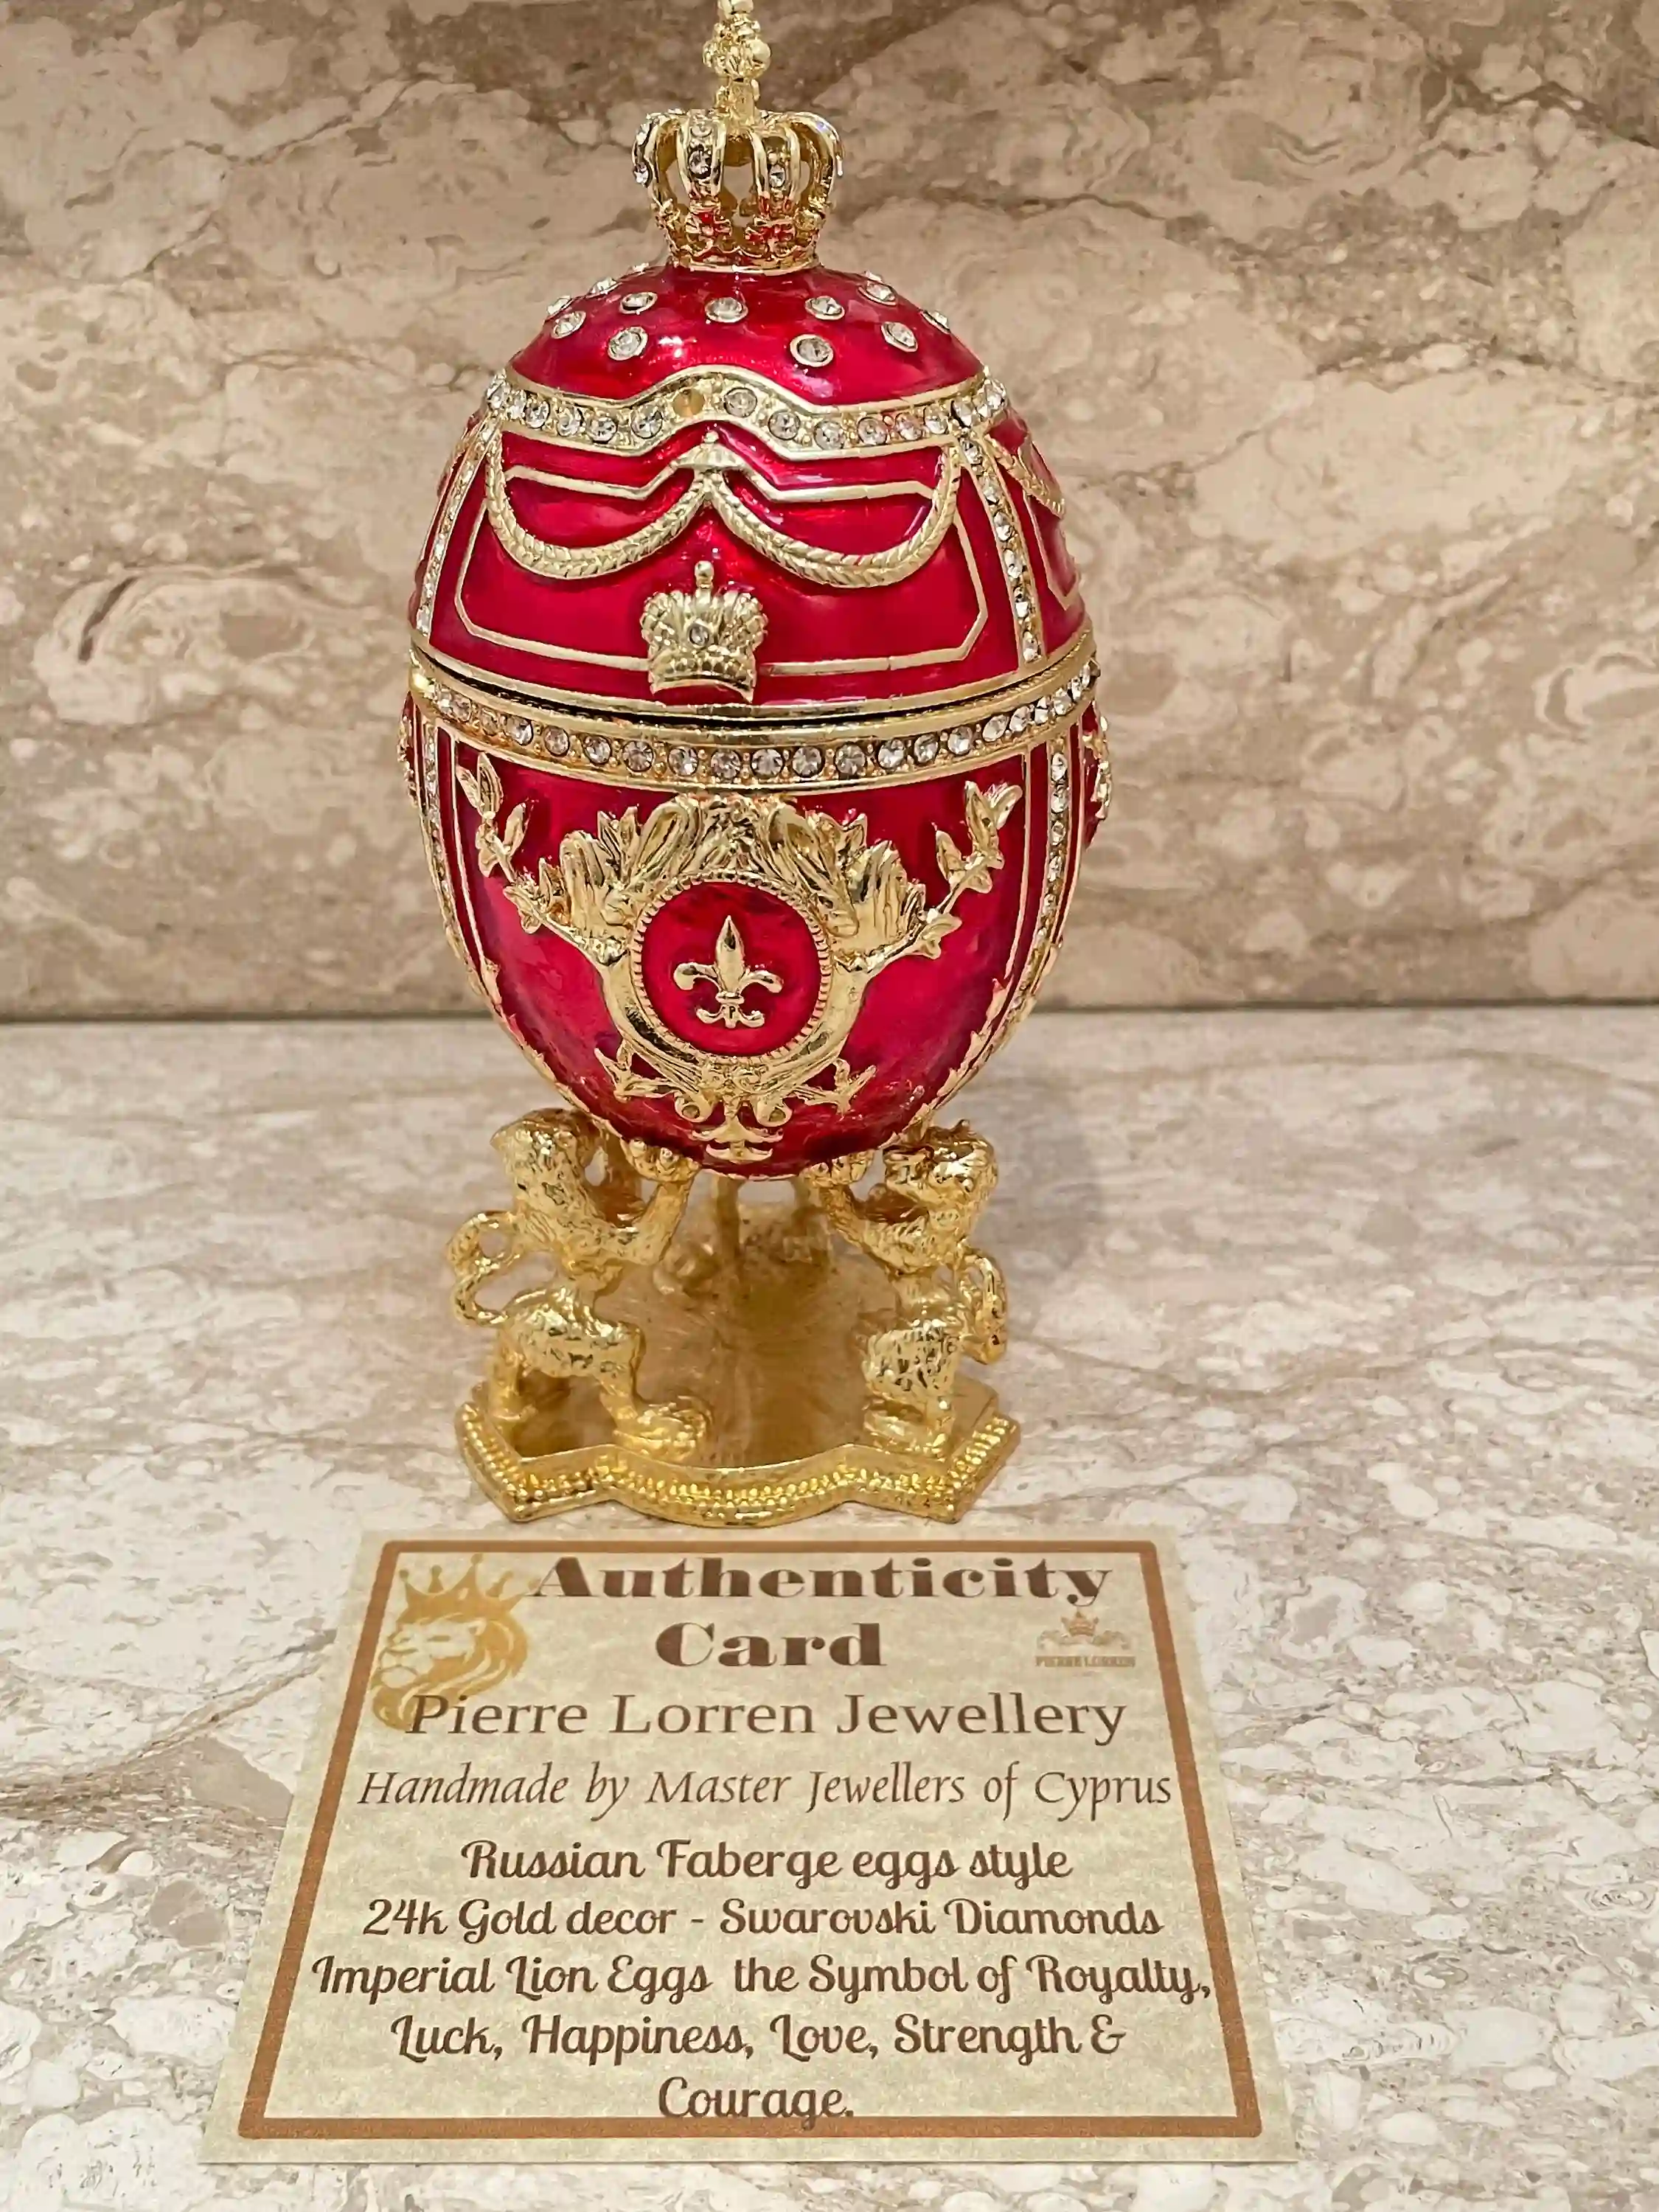 Ruby Red Faberge Egg Mom birthday Gift Faberge Trinket box 24kGold 200 AustrianCrystal HANDSET Faberge Love gifts for wife HANDMADE Ornament 